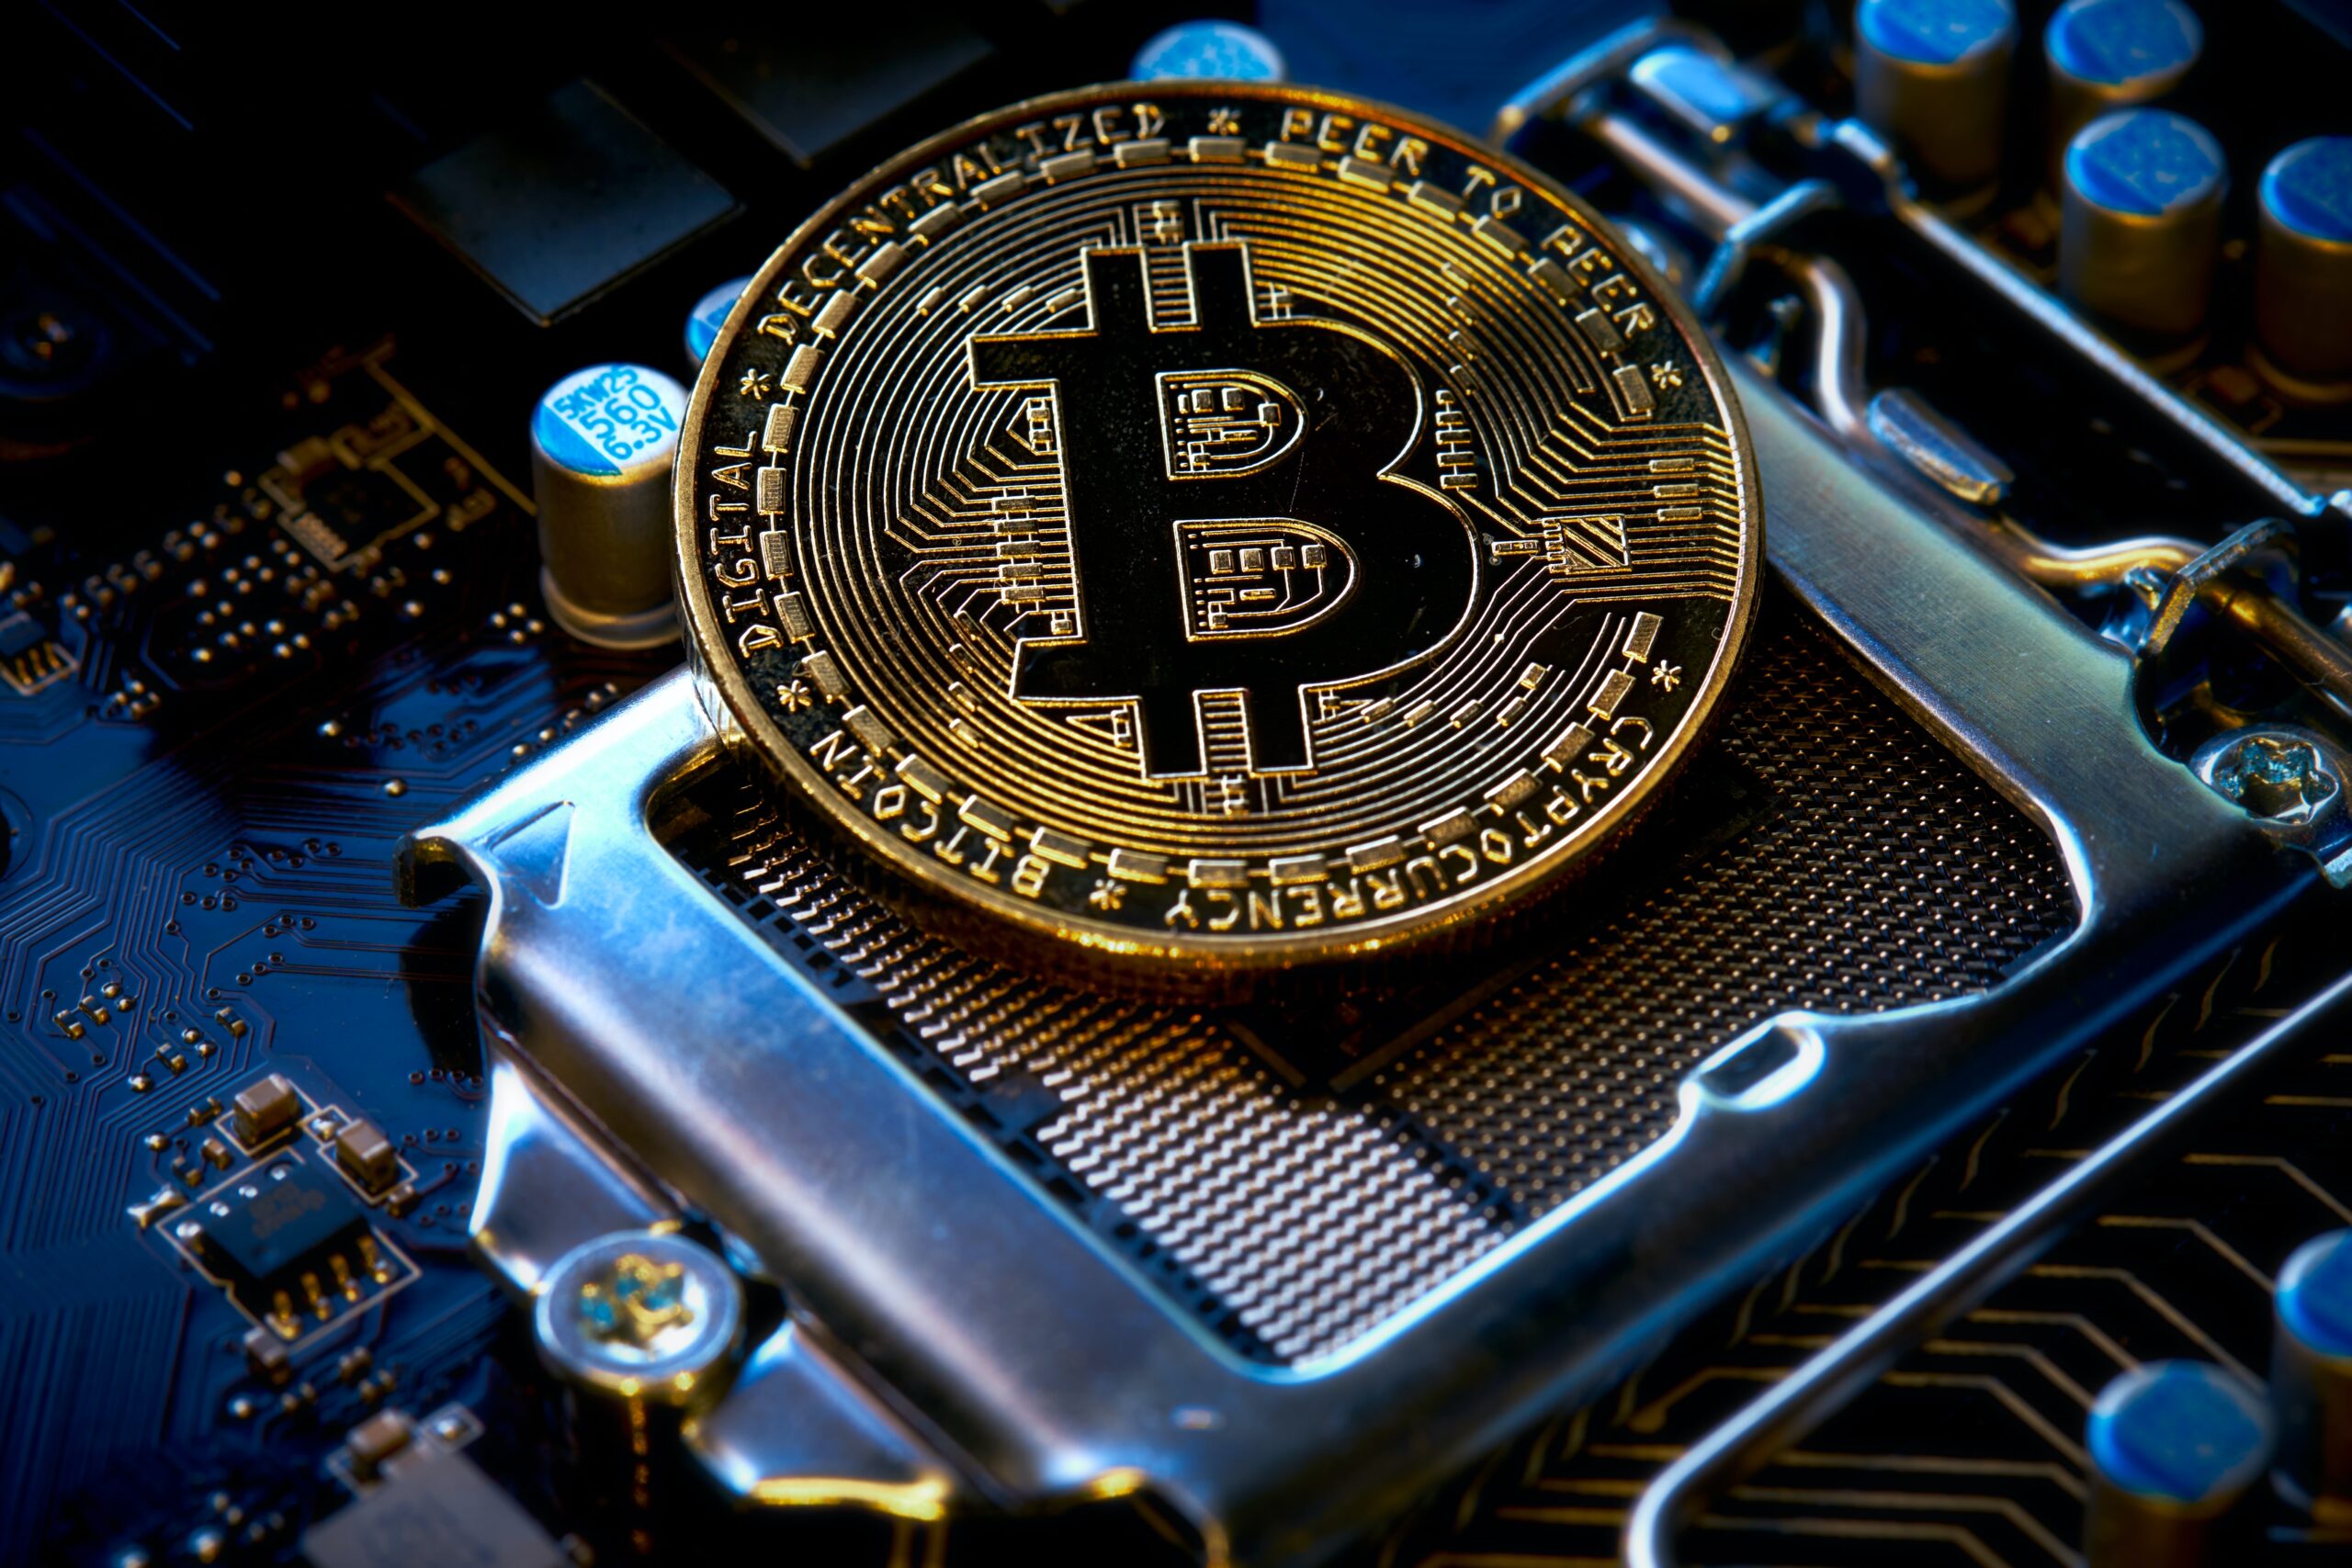 Bitcoin Miners Show Strong Accumulation As Their Inventories Spike Up